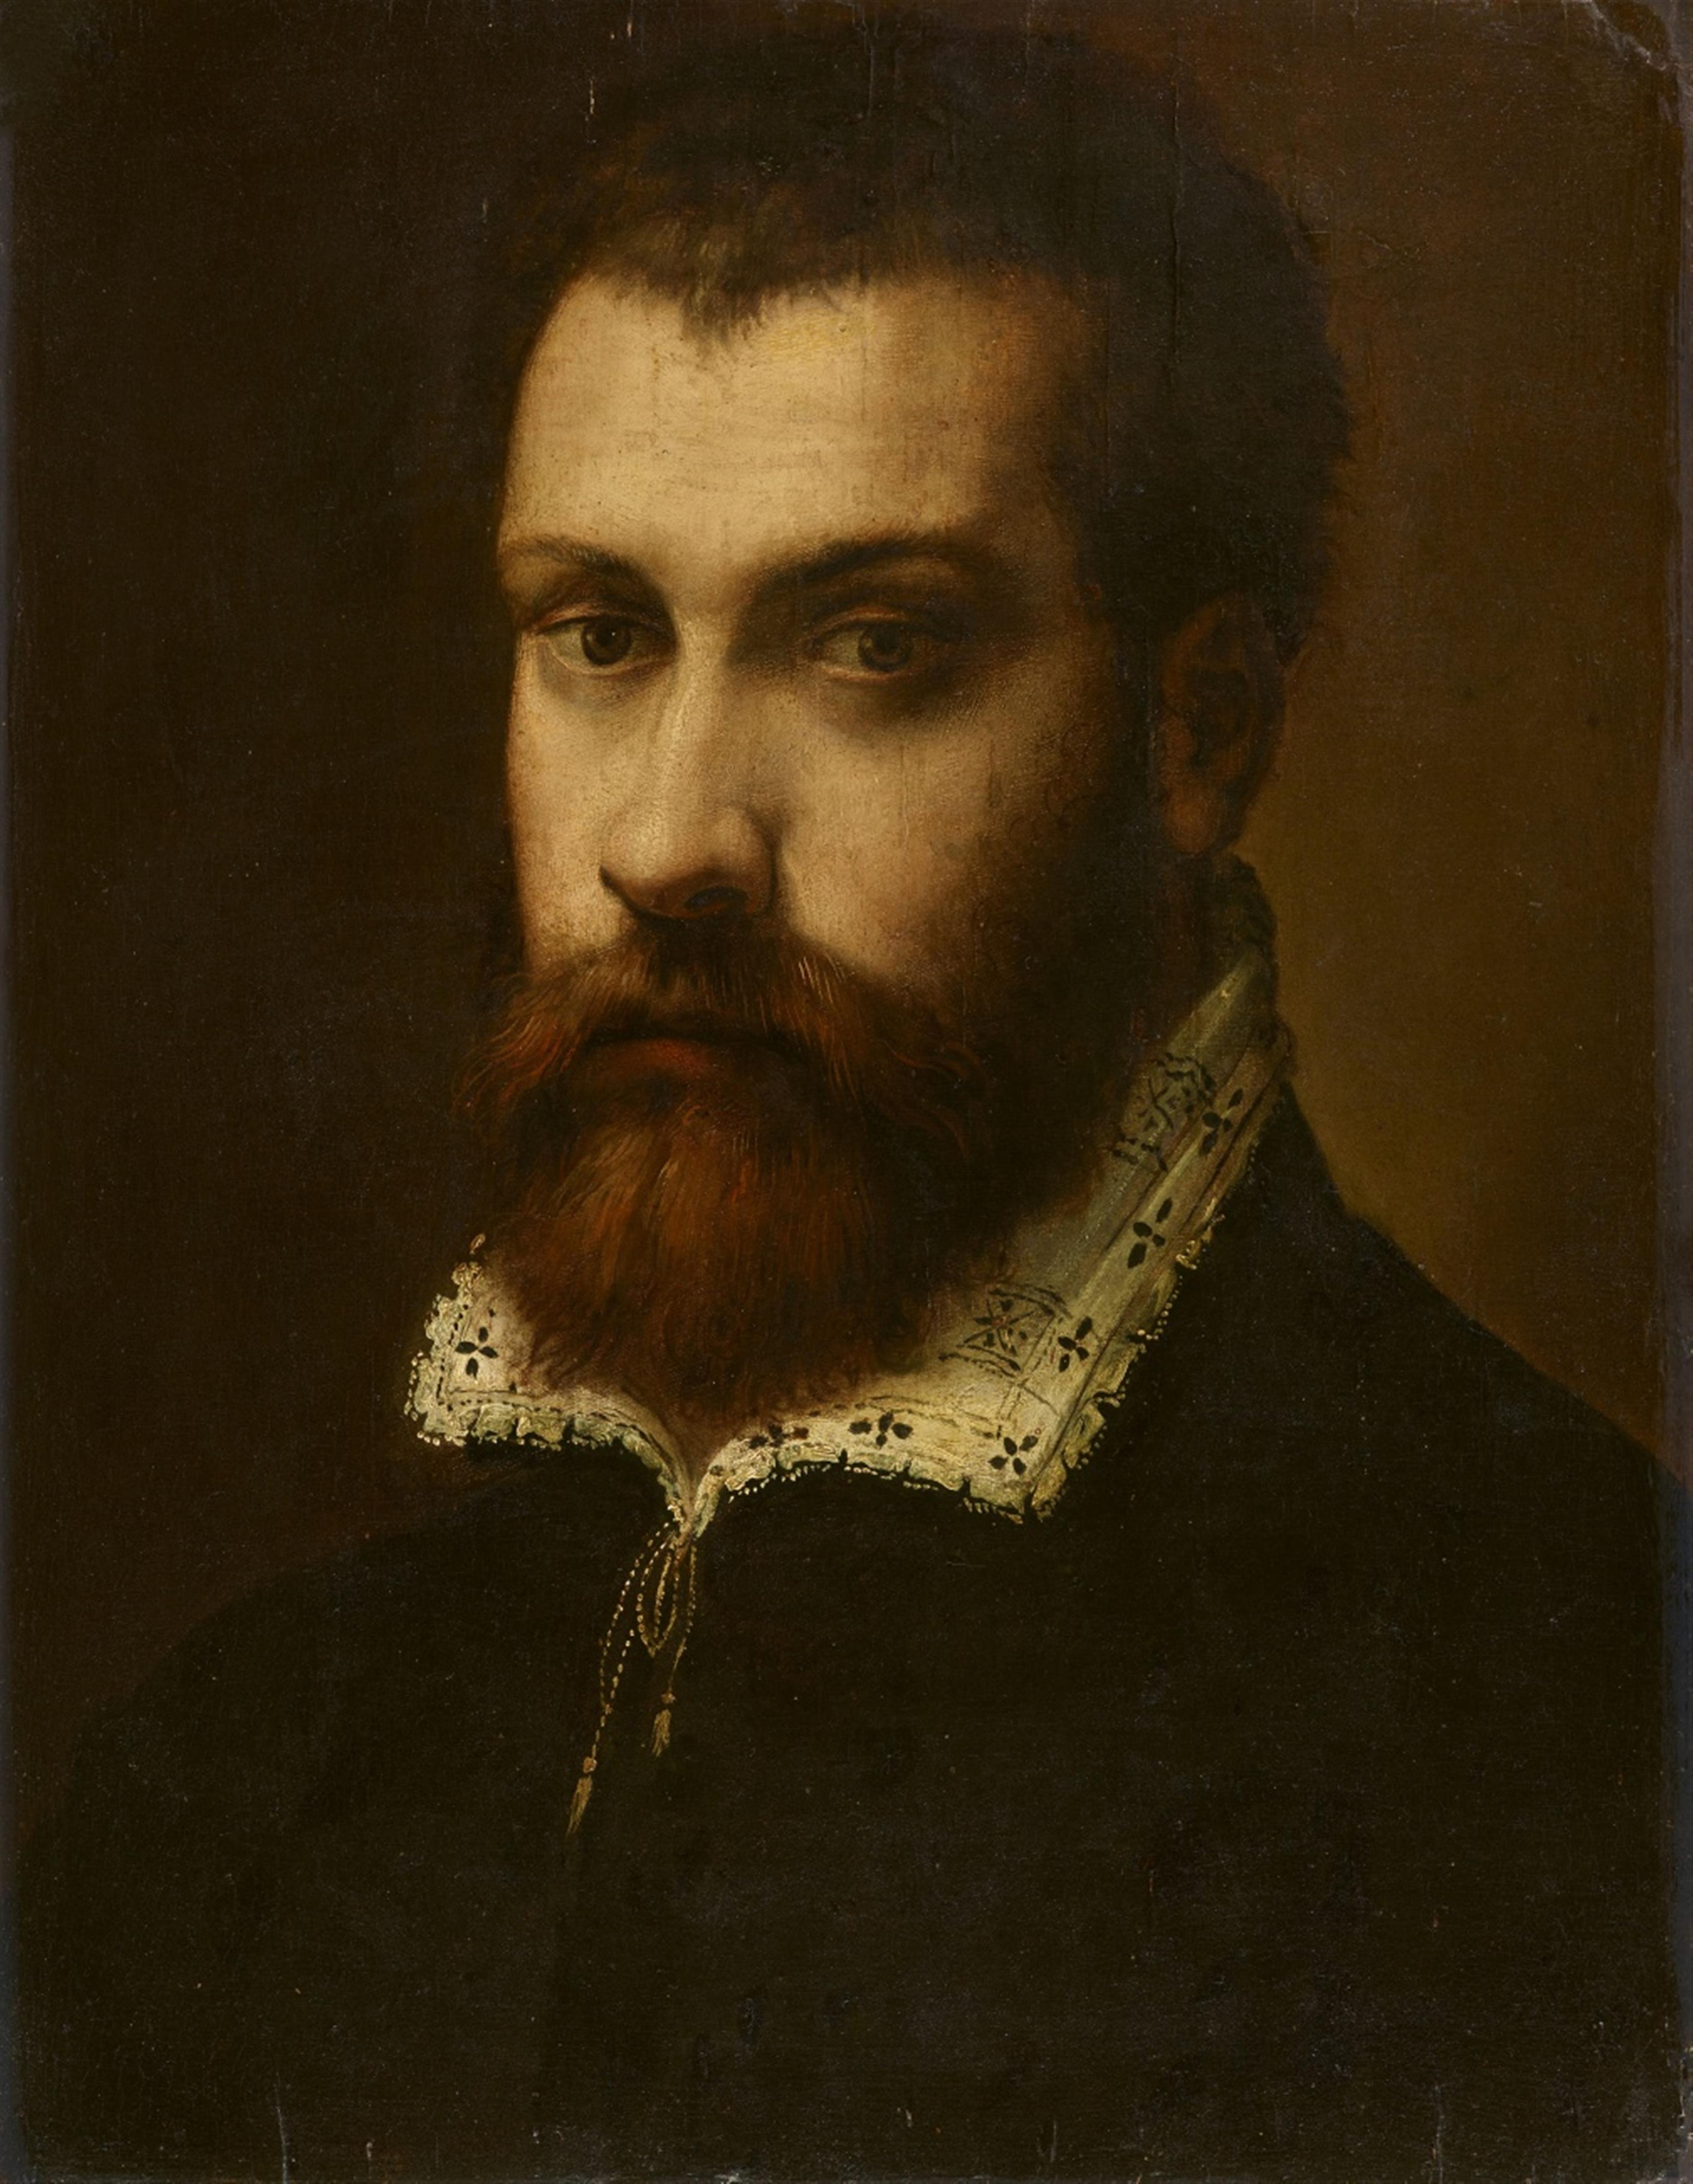 Florentine School around 1600 - Portrait of a Young Man with a Beard - image-1